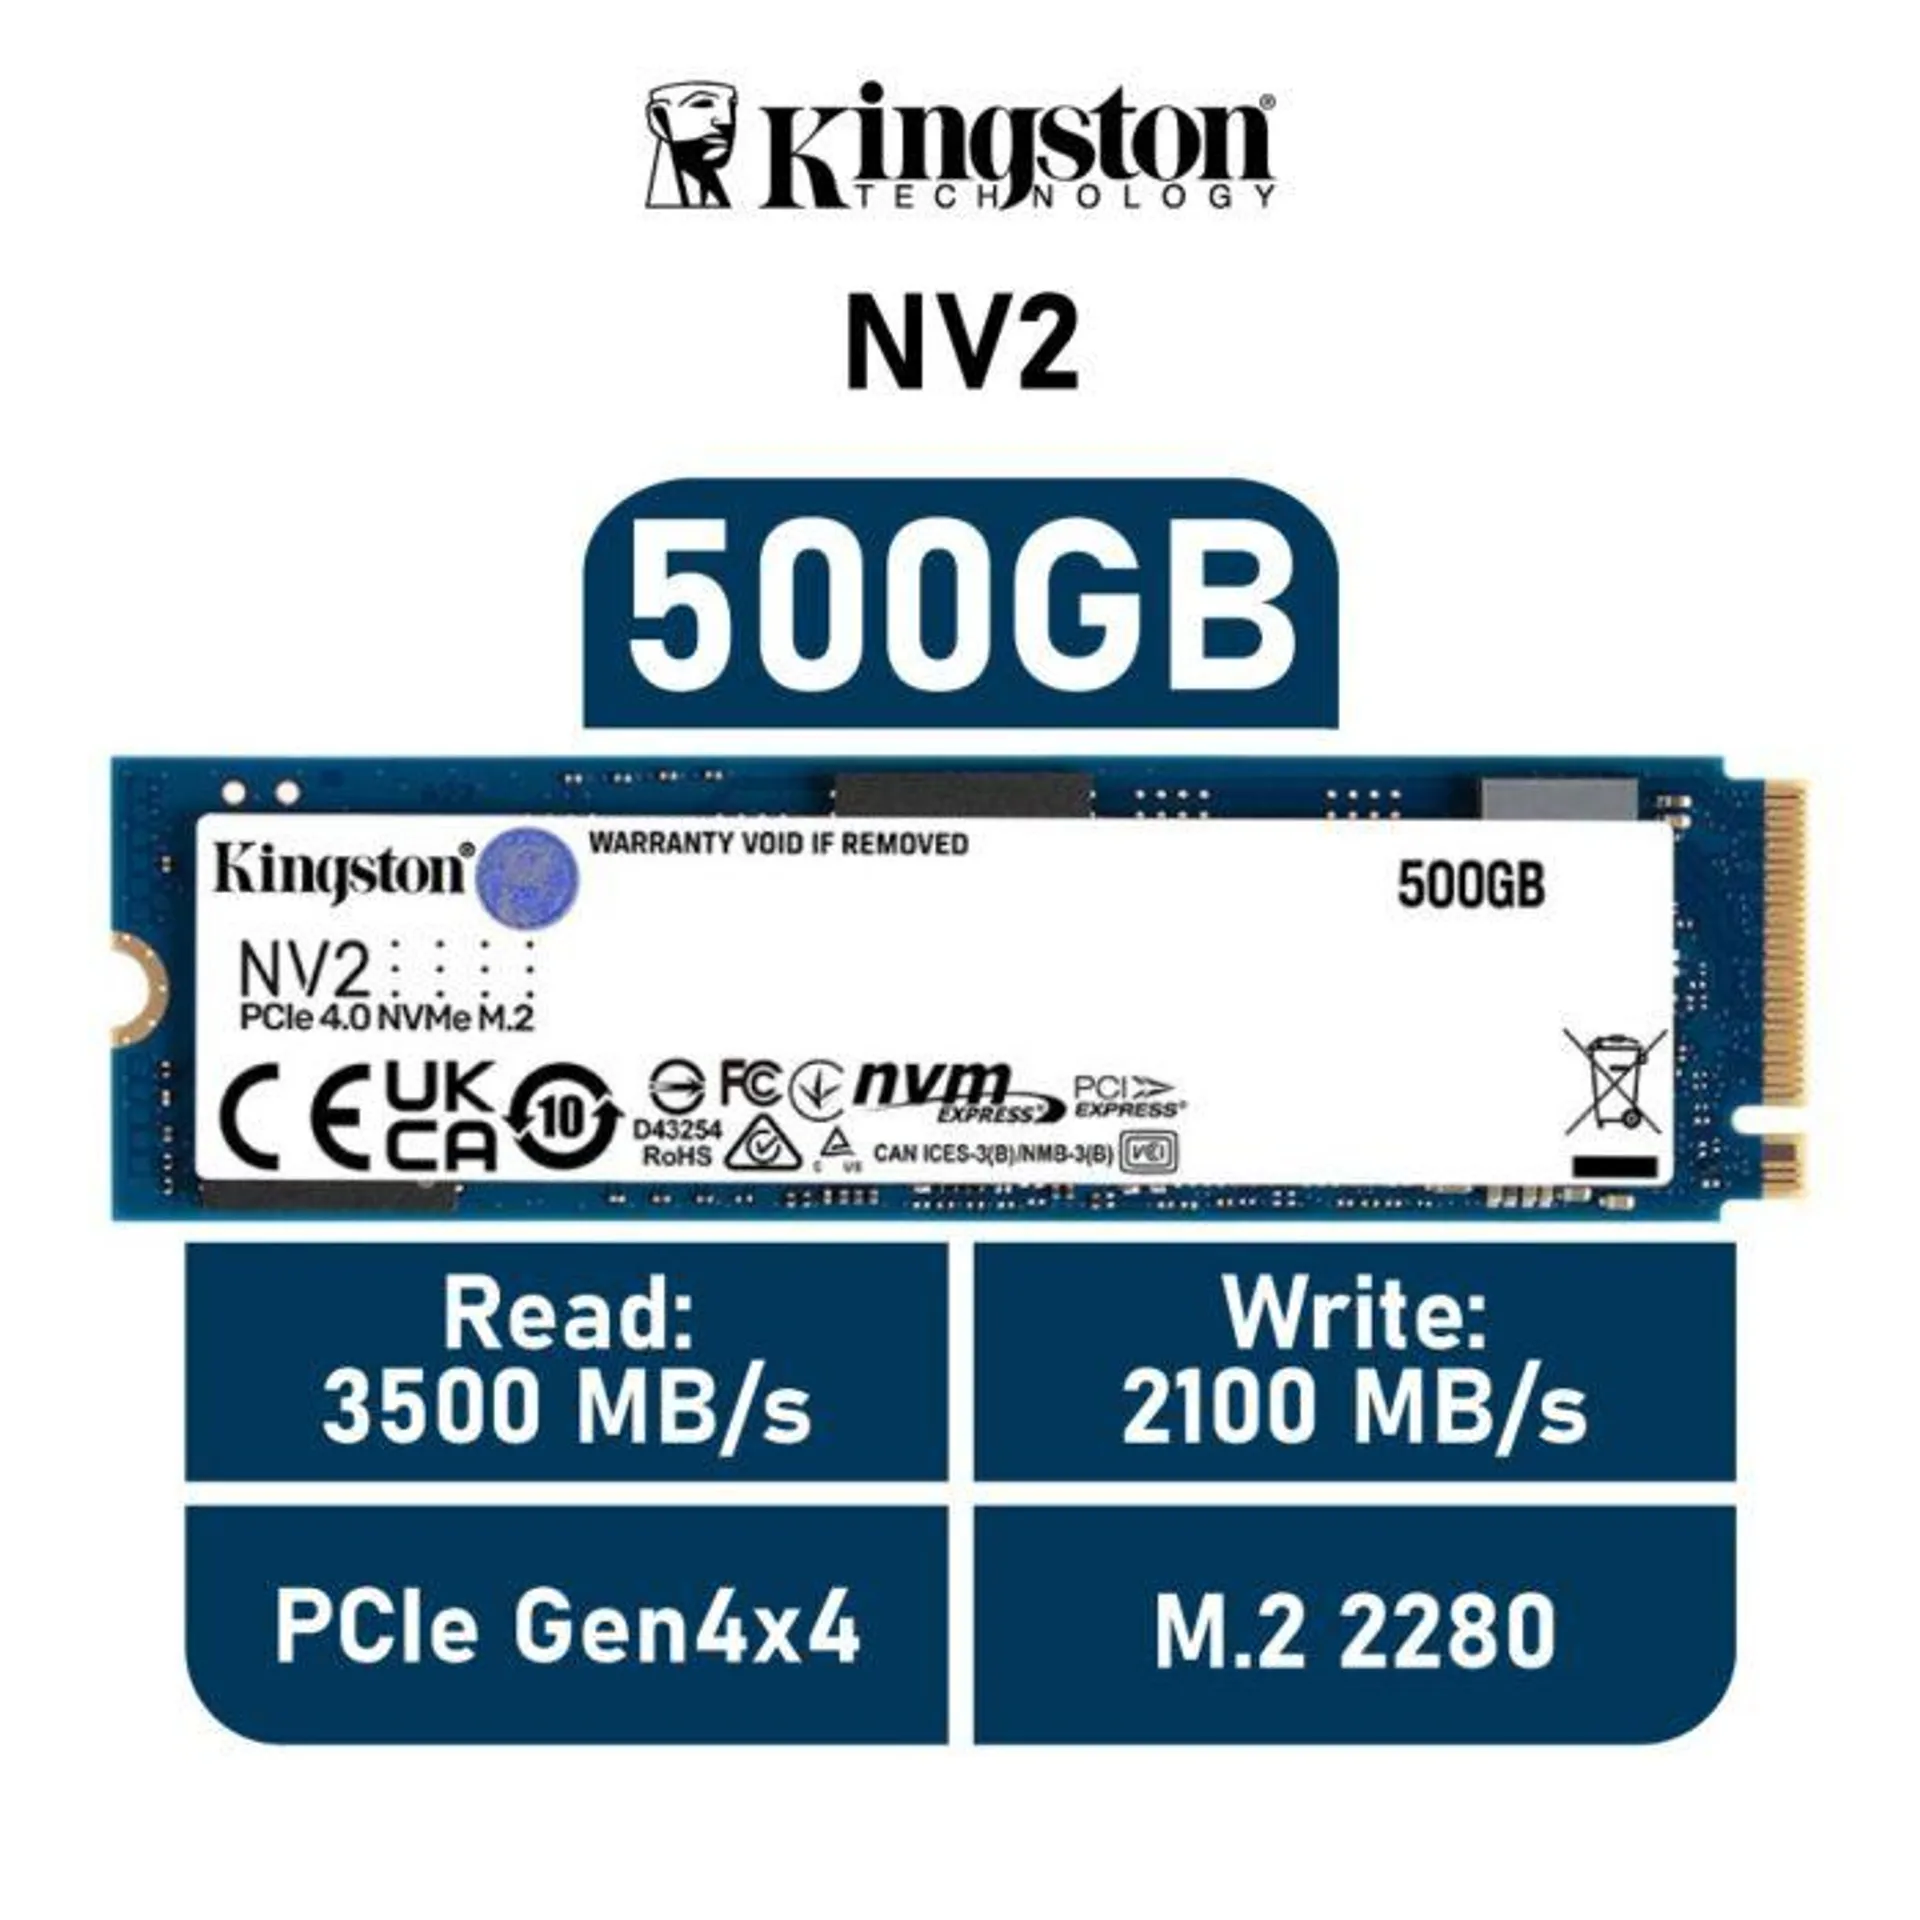 Kingston NV2 500GB PCIe Gen4x4 SNV2S/500G M.2 2280 Solid State Drive